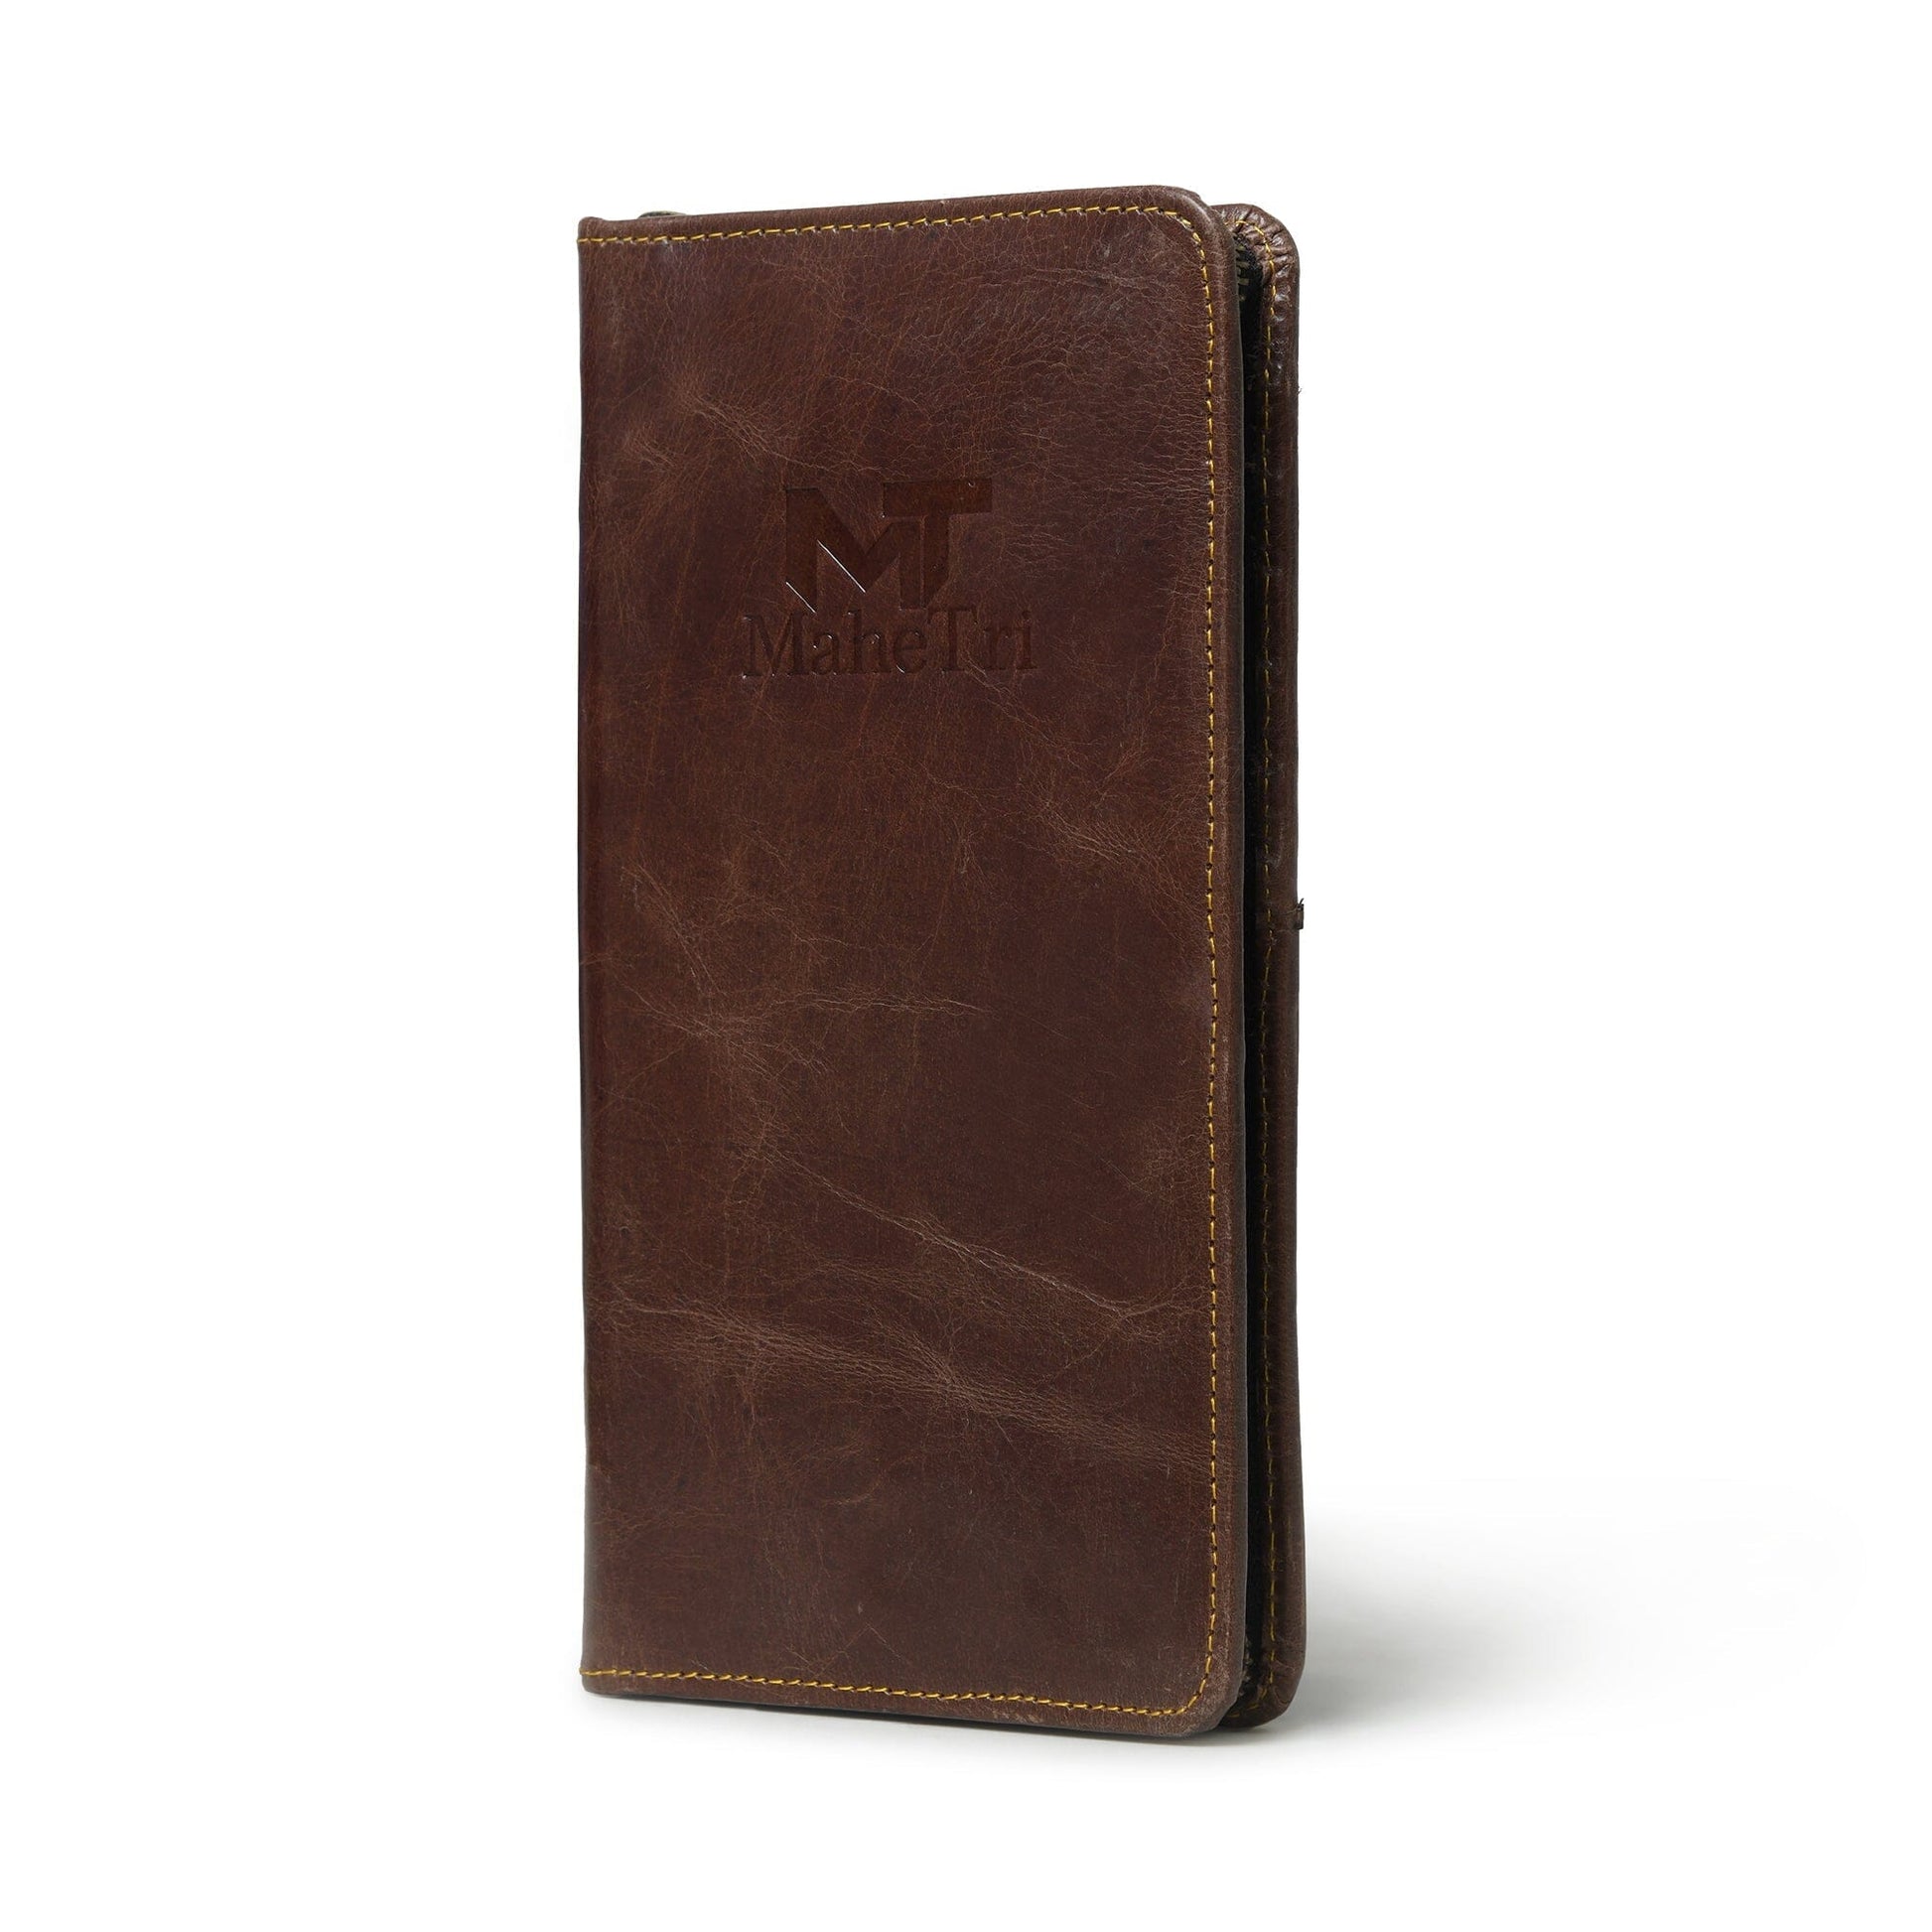 Blair Women's Wallet- Cocoa Brown - The Tool Store